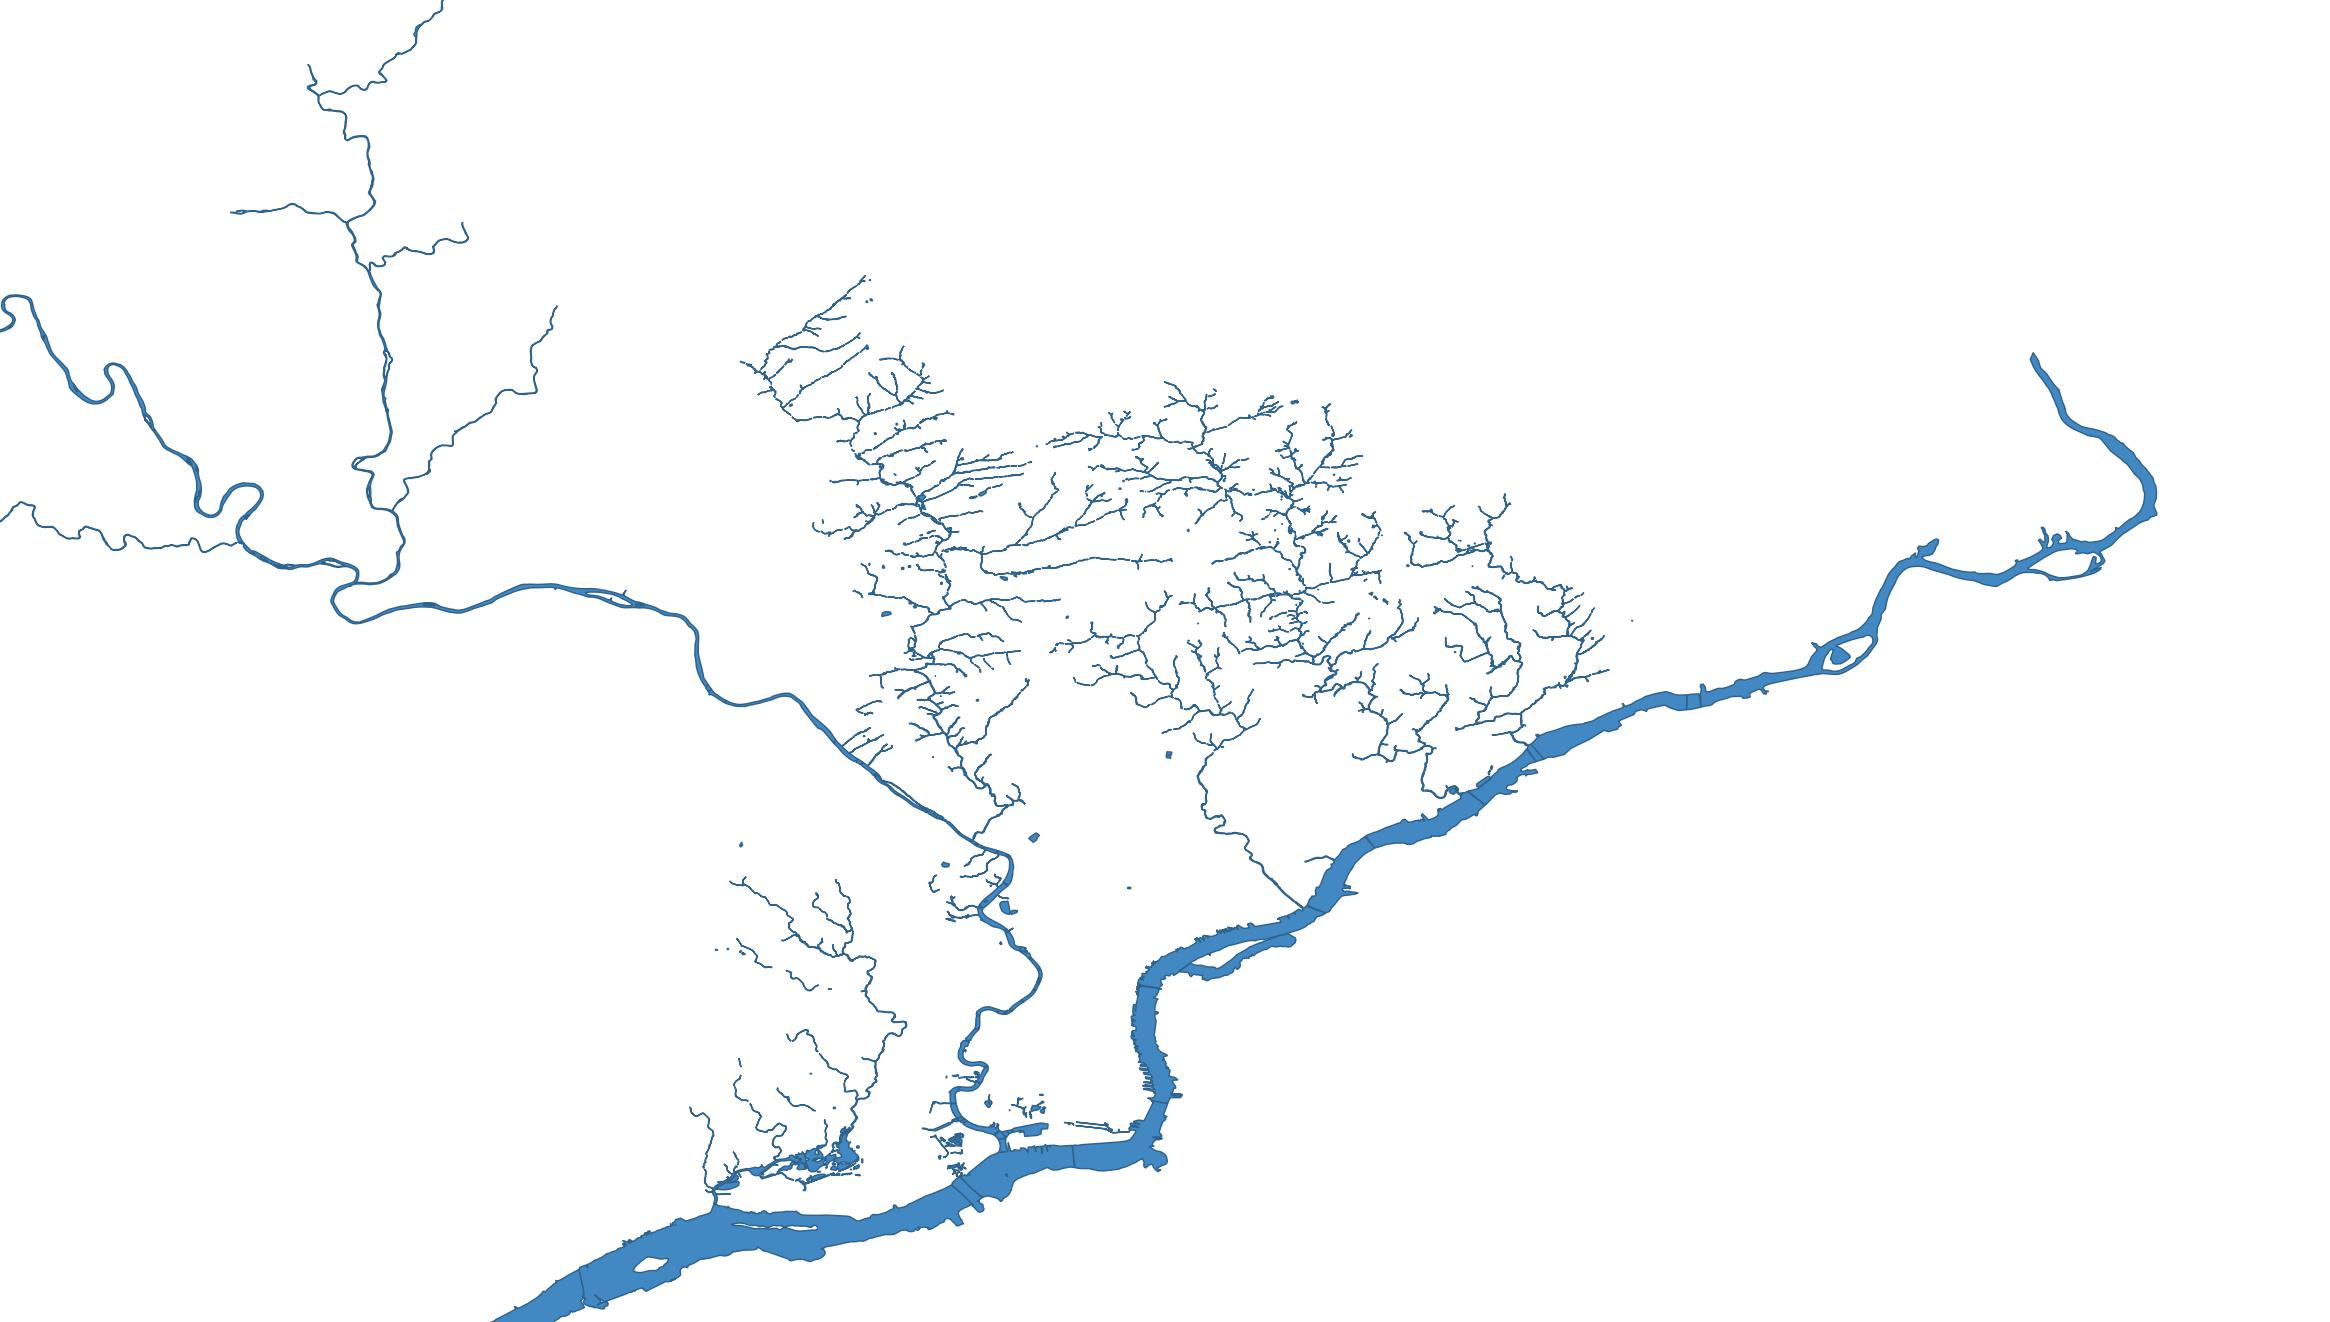 Many spidering waterways consolidating into a major river